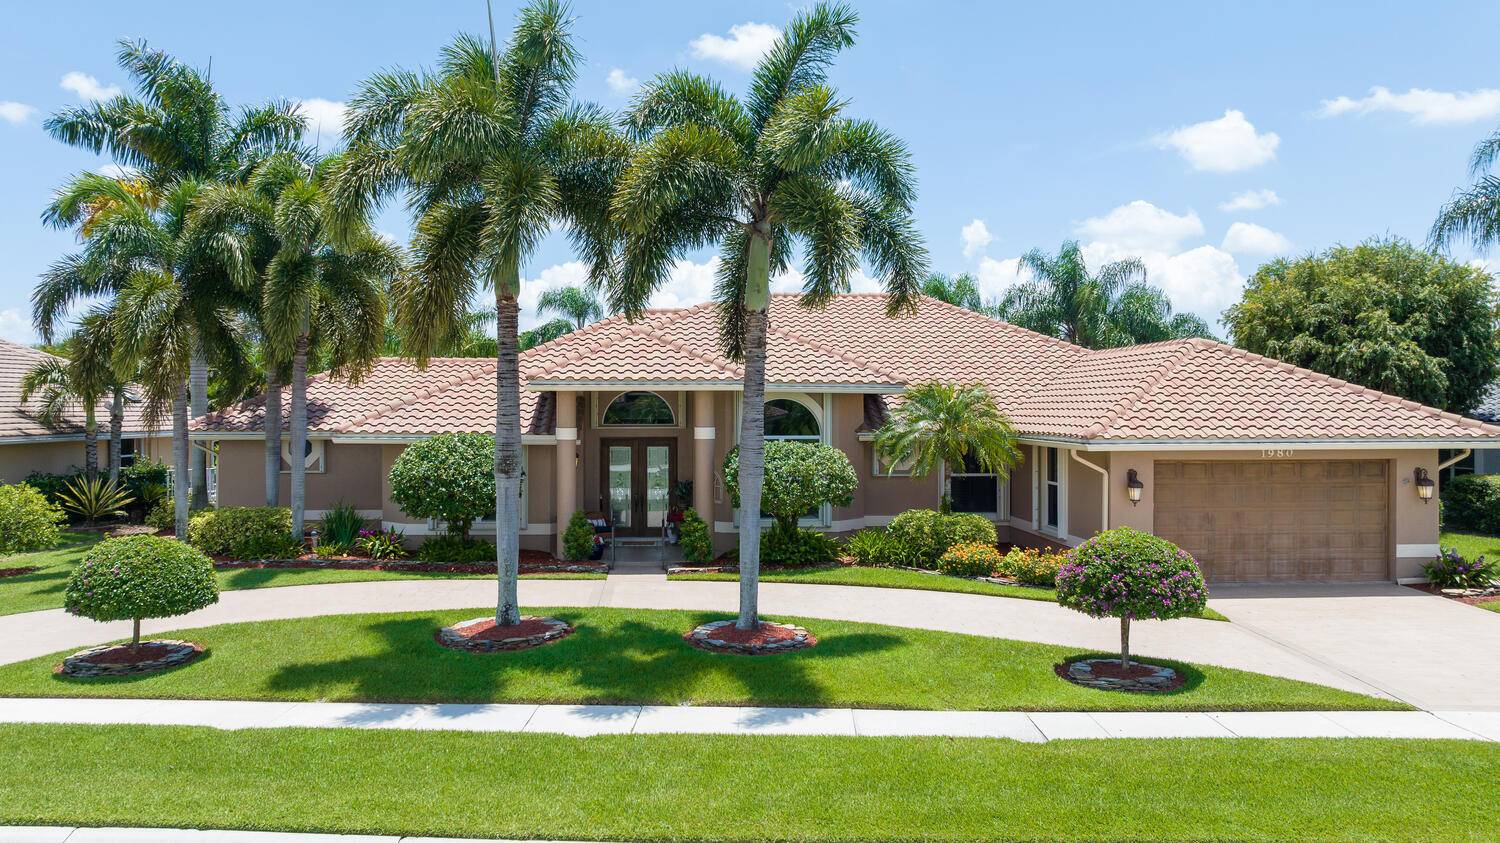 Located in the heart of North America's premier equestrian community, this luxurious Mediterranean style home offers inspiring spaces and an escape from the mundane.